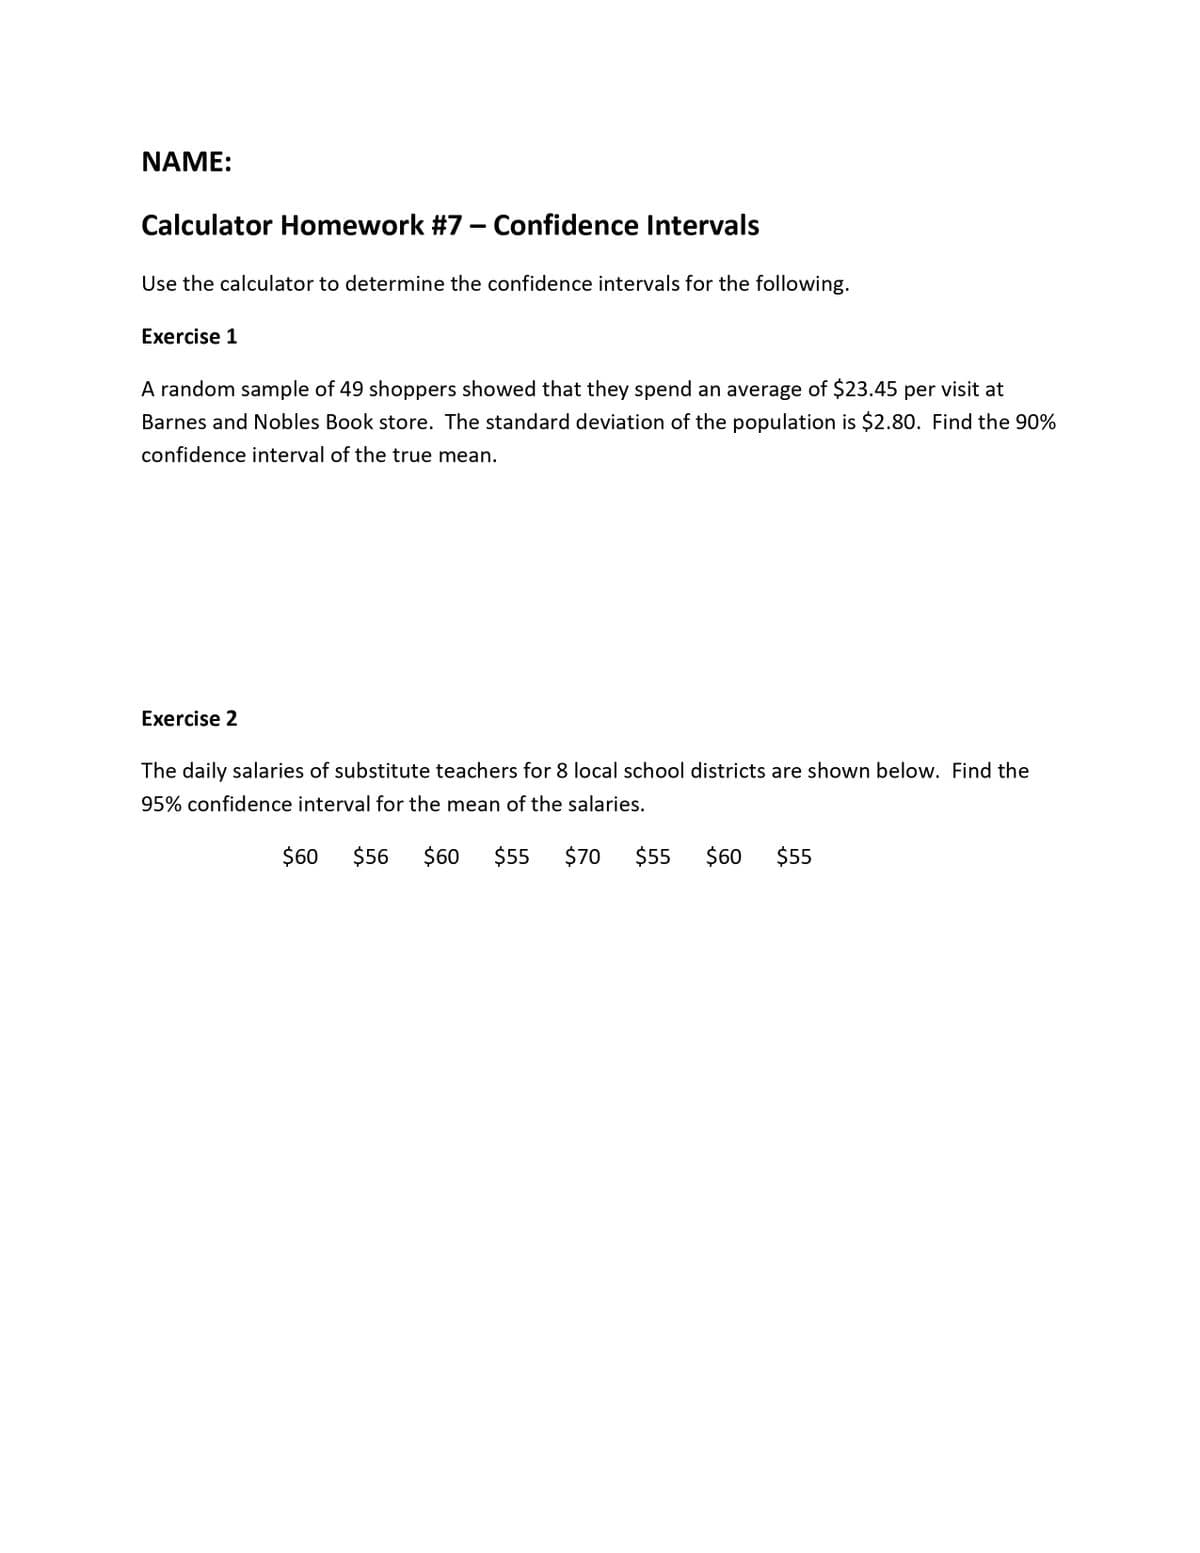 NAME:
Calculator Homework #7 – Confidence Intervals
Use the calculator to determine the confidence intervals for the following.
Exercise 1
A random sample of 49 shoppers showed that they spend an average of $23.45 per visit at
Barnes and Nobles Book store. The standard deviation of the population is $2.80. Find the 90%
confidence interval of the true mean.
Exercise 2
The daily salaries of substitute teachers for 8 local school districts are shown below. Find the
95% confidence interval for the mean of the salaries.
$60
$56
$60
$55
$70
$55
$60
$55
